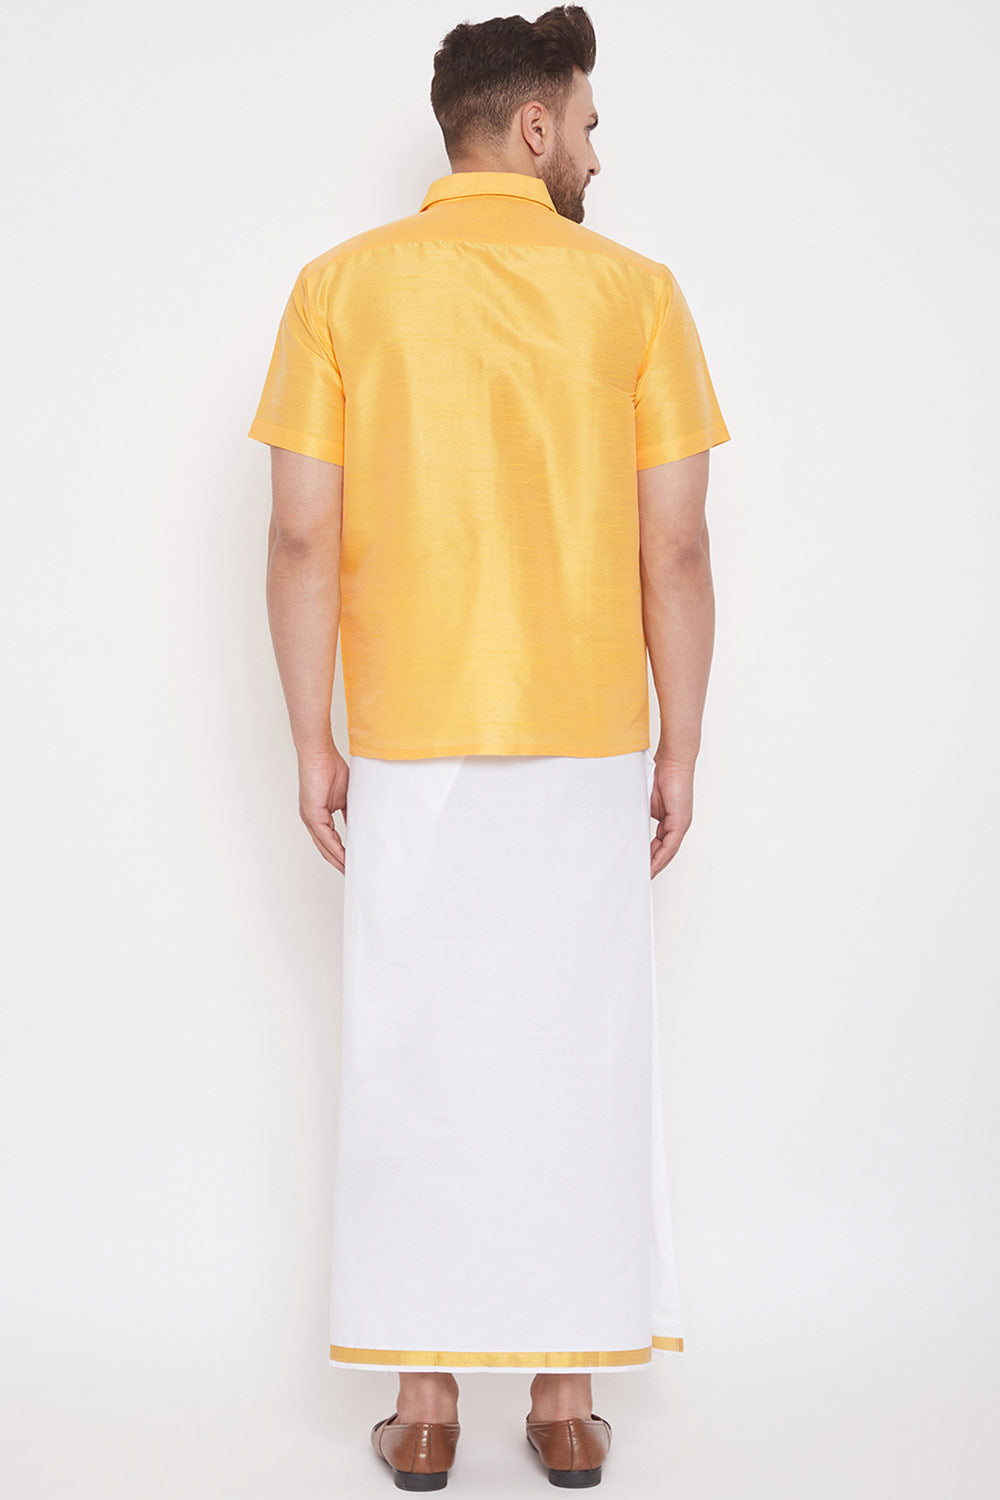 Solid Yellow Shirt and Mundu for Casual Wear